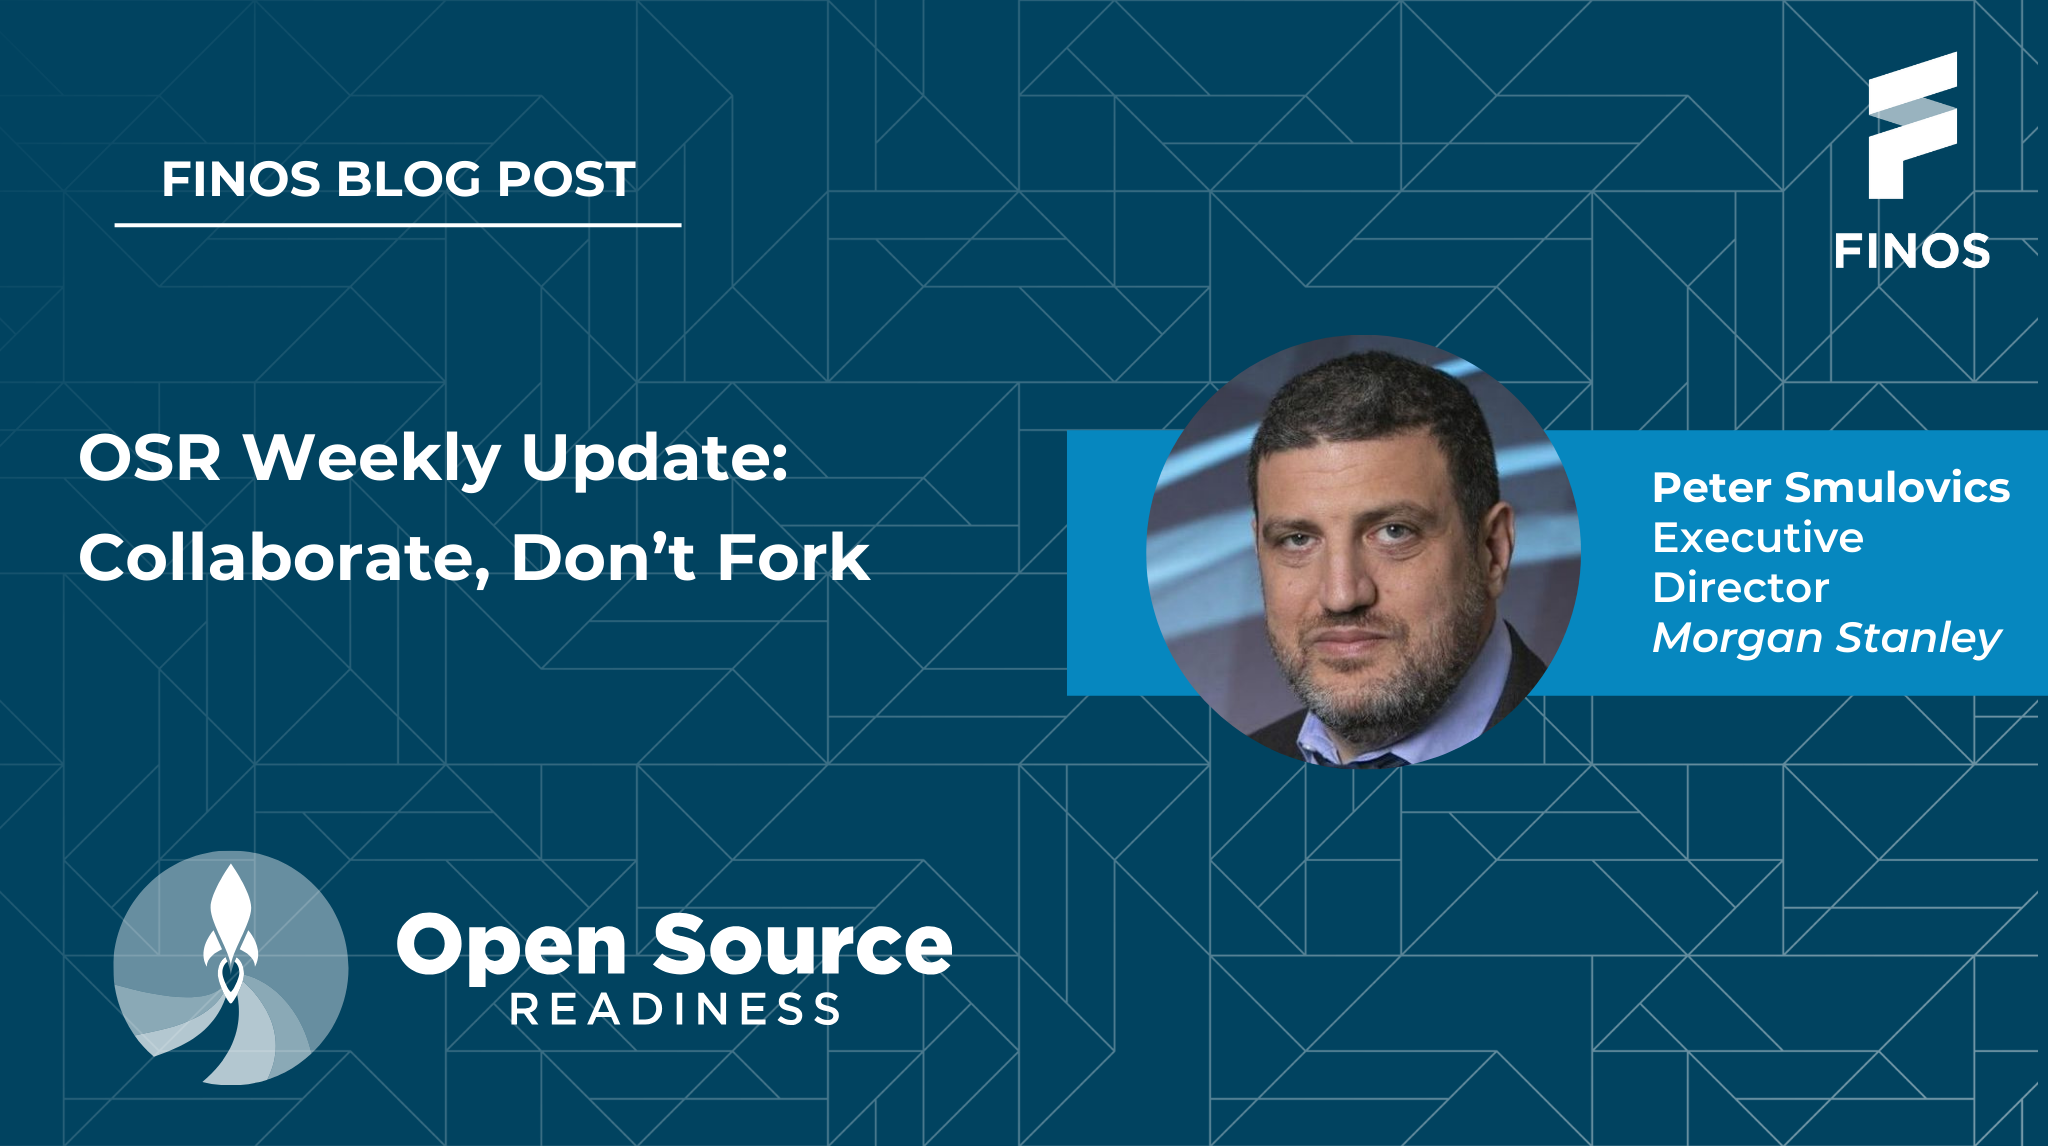 FINOS Resource Center | Collaborate, Don't Fork - Peter Smulovics